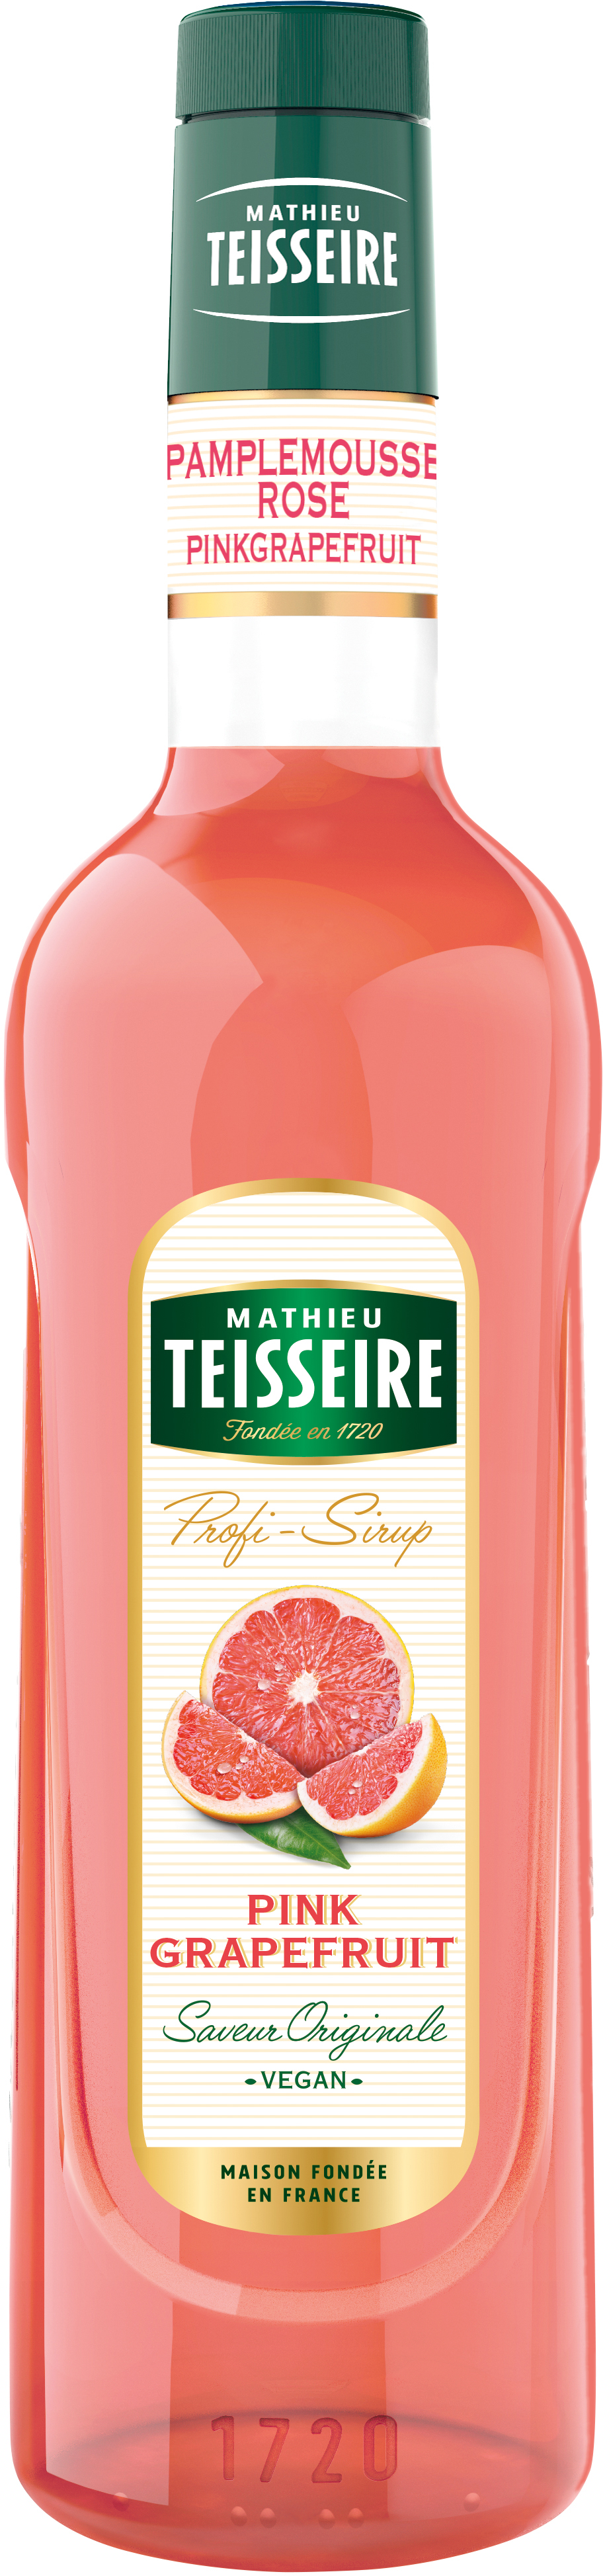 Teisseire Pink Grapefruit Sirup - 0,7L